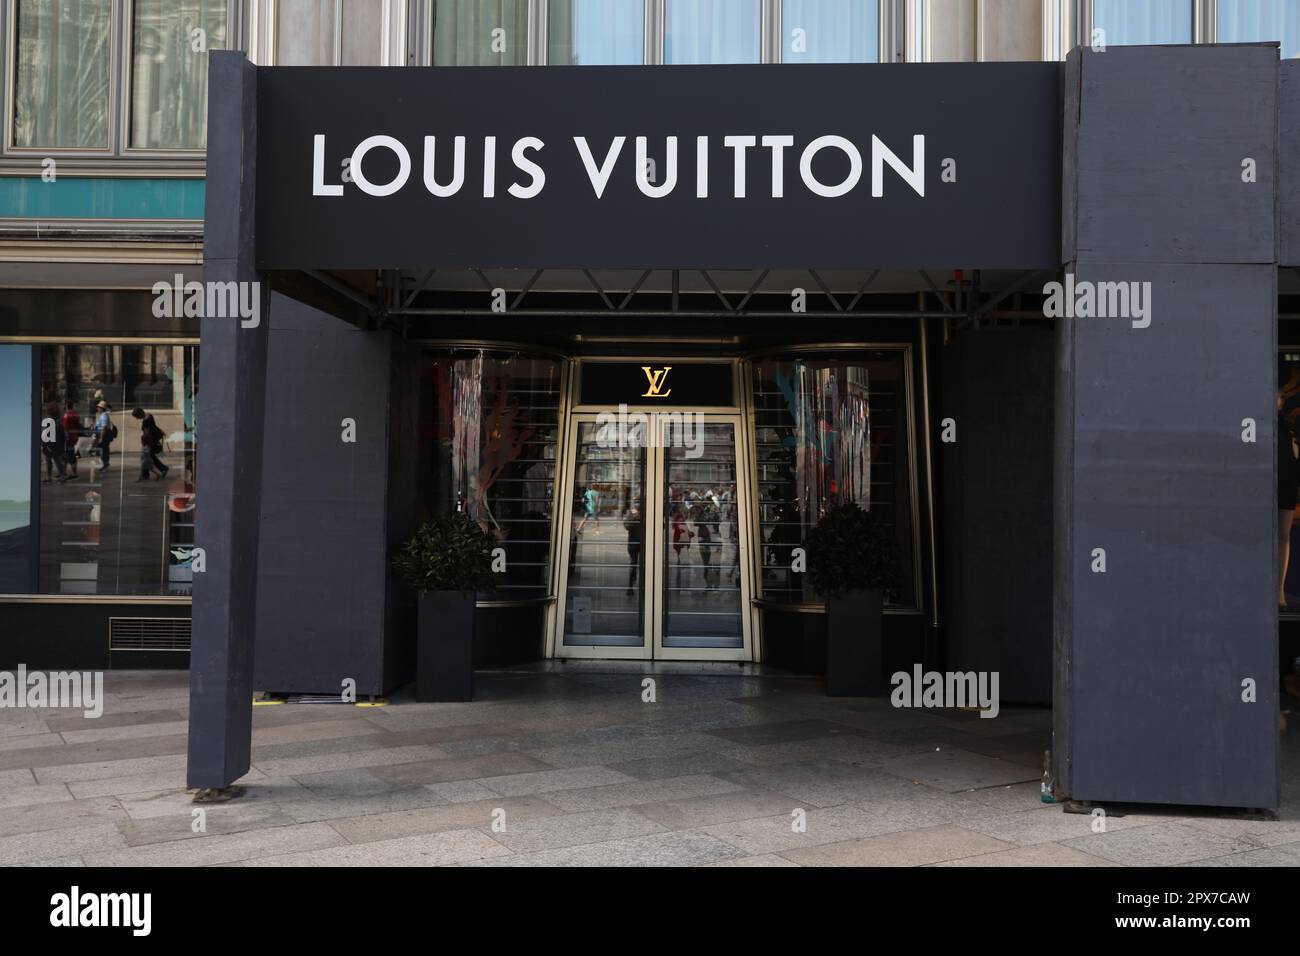 Louis Vuitton fashion store, Cologne, Germany Europe Stock Photo - Alamy